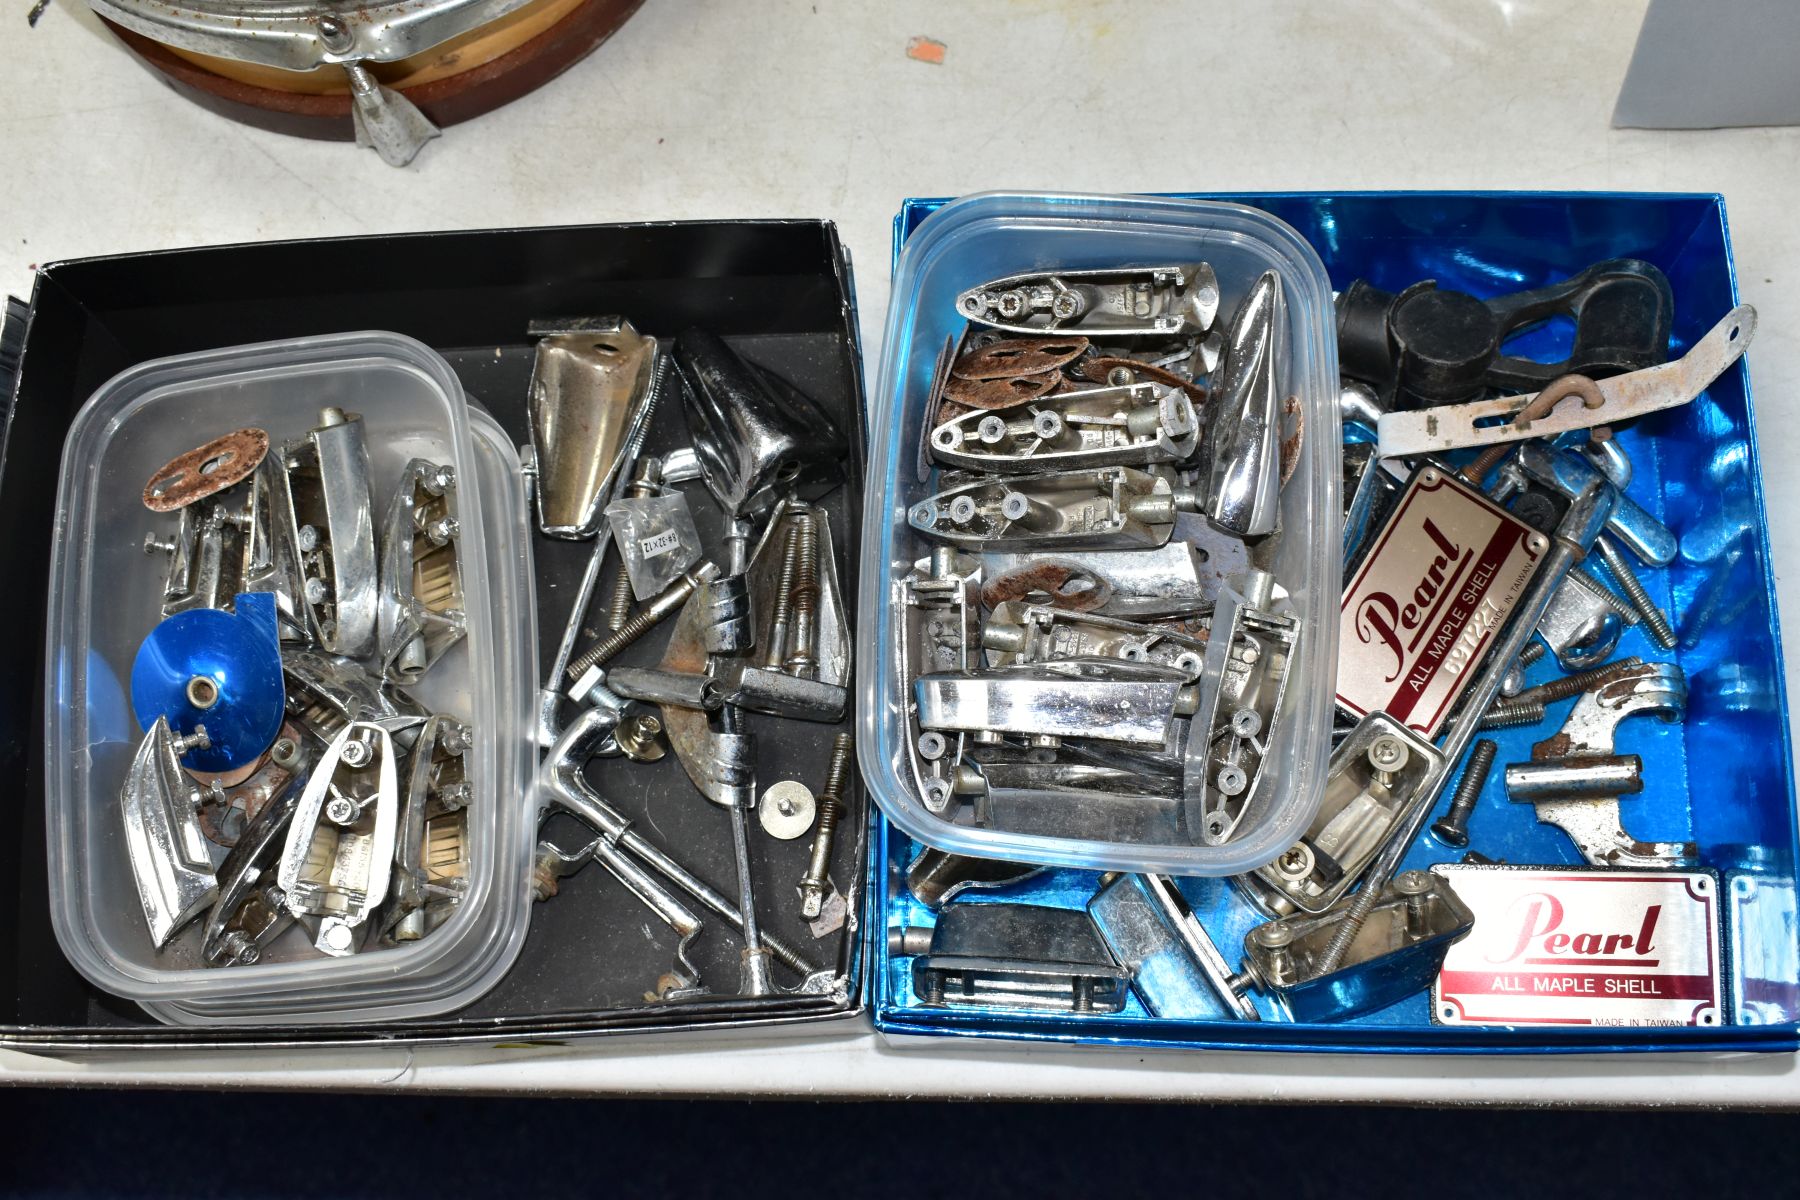 TWO TRAYS CONTAINING VINTAGE DRUM LUGS AND BOLTS, including Beverley, Pearl, etc